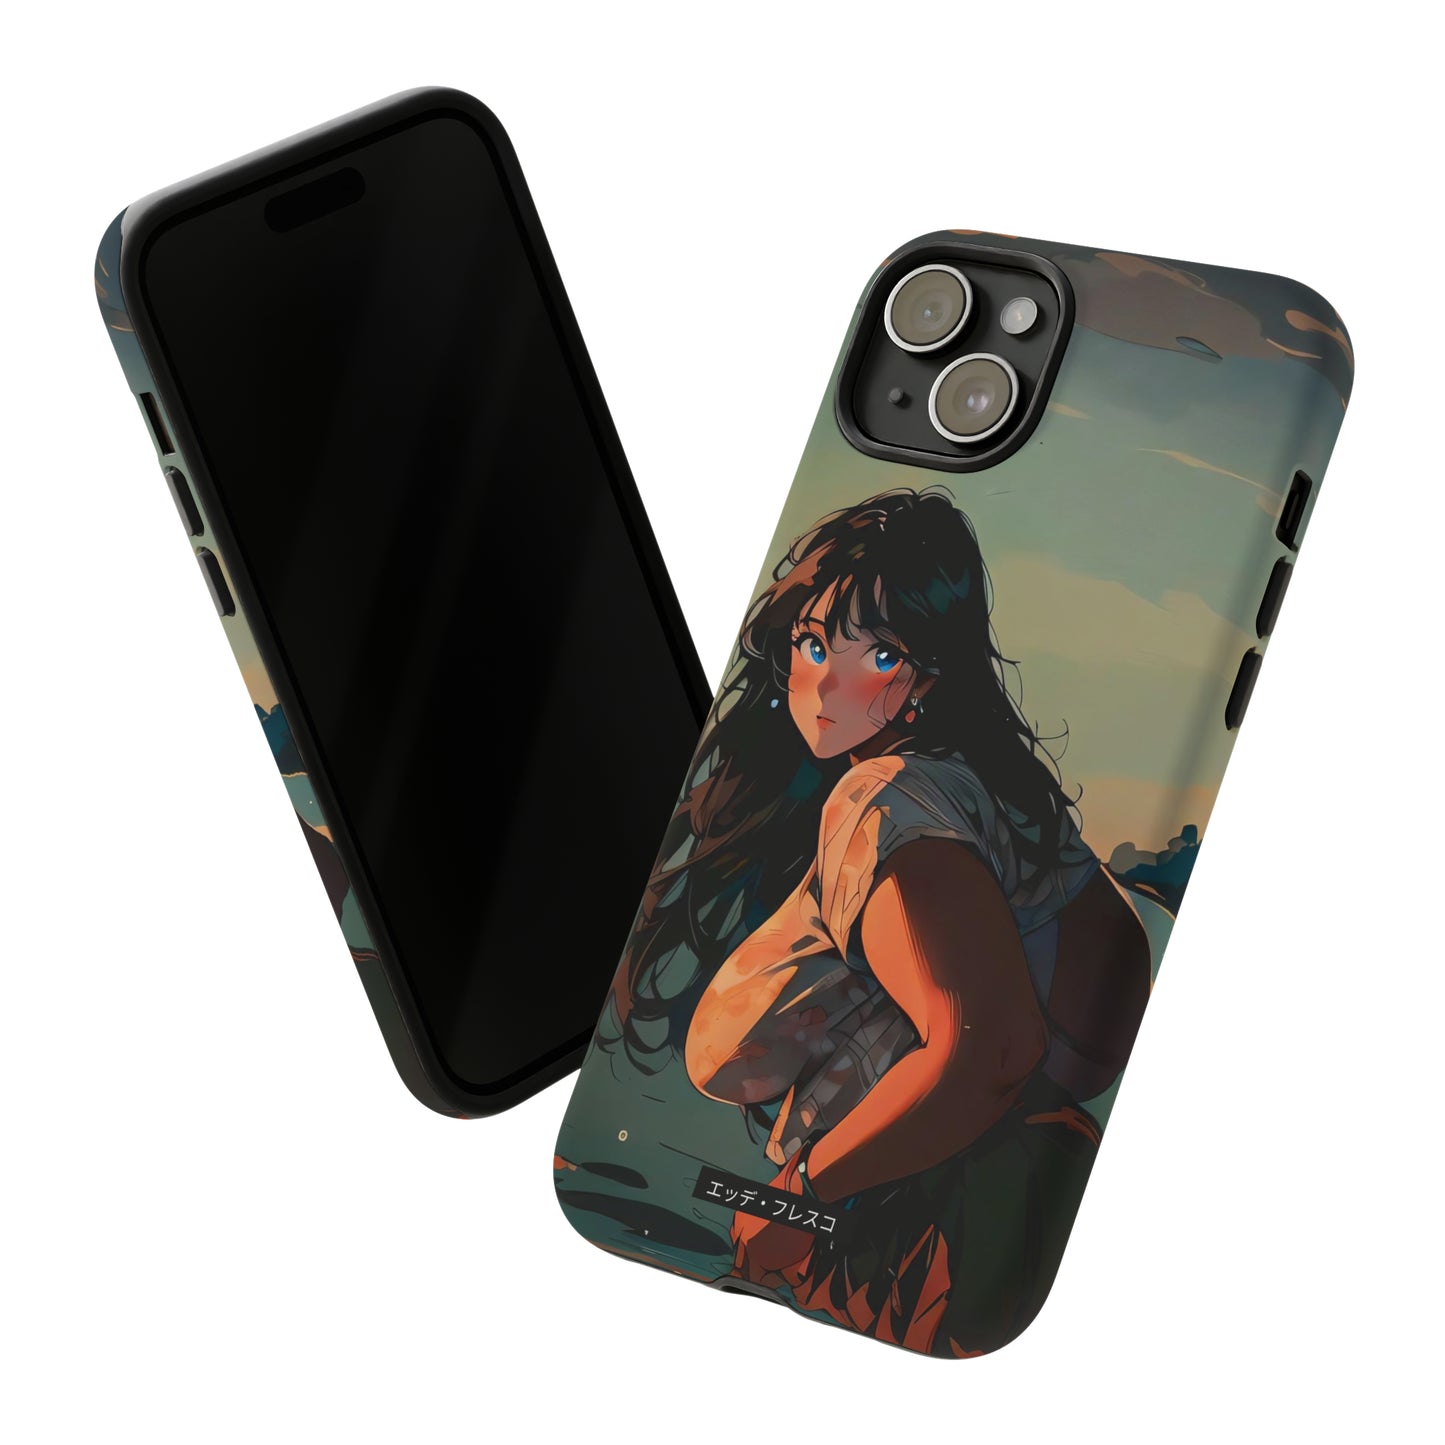 Anime Style Art Tough Cases- "Thick Overload"